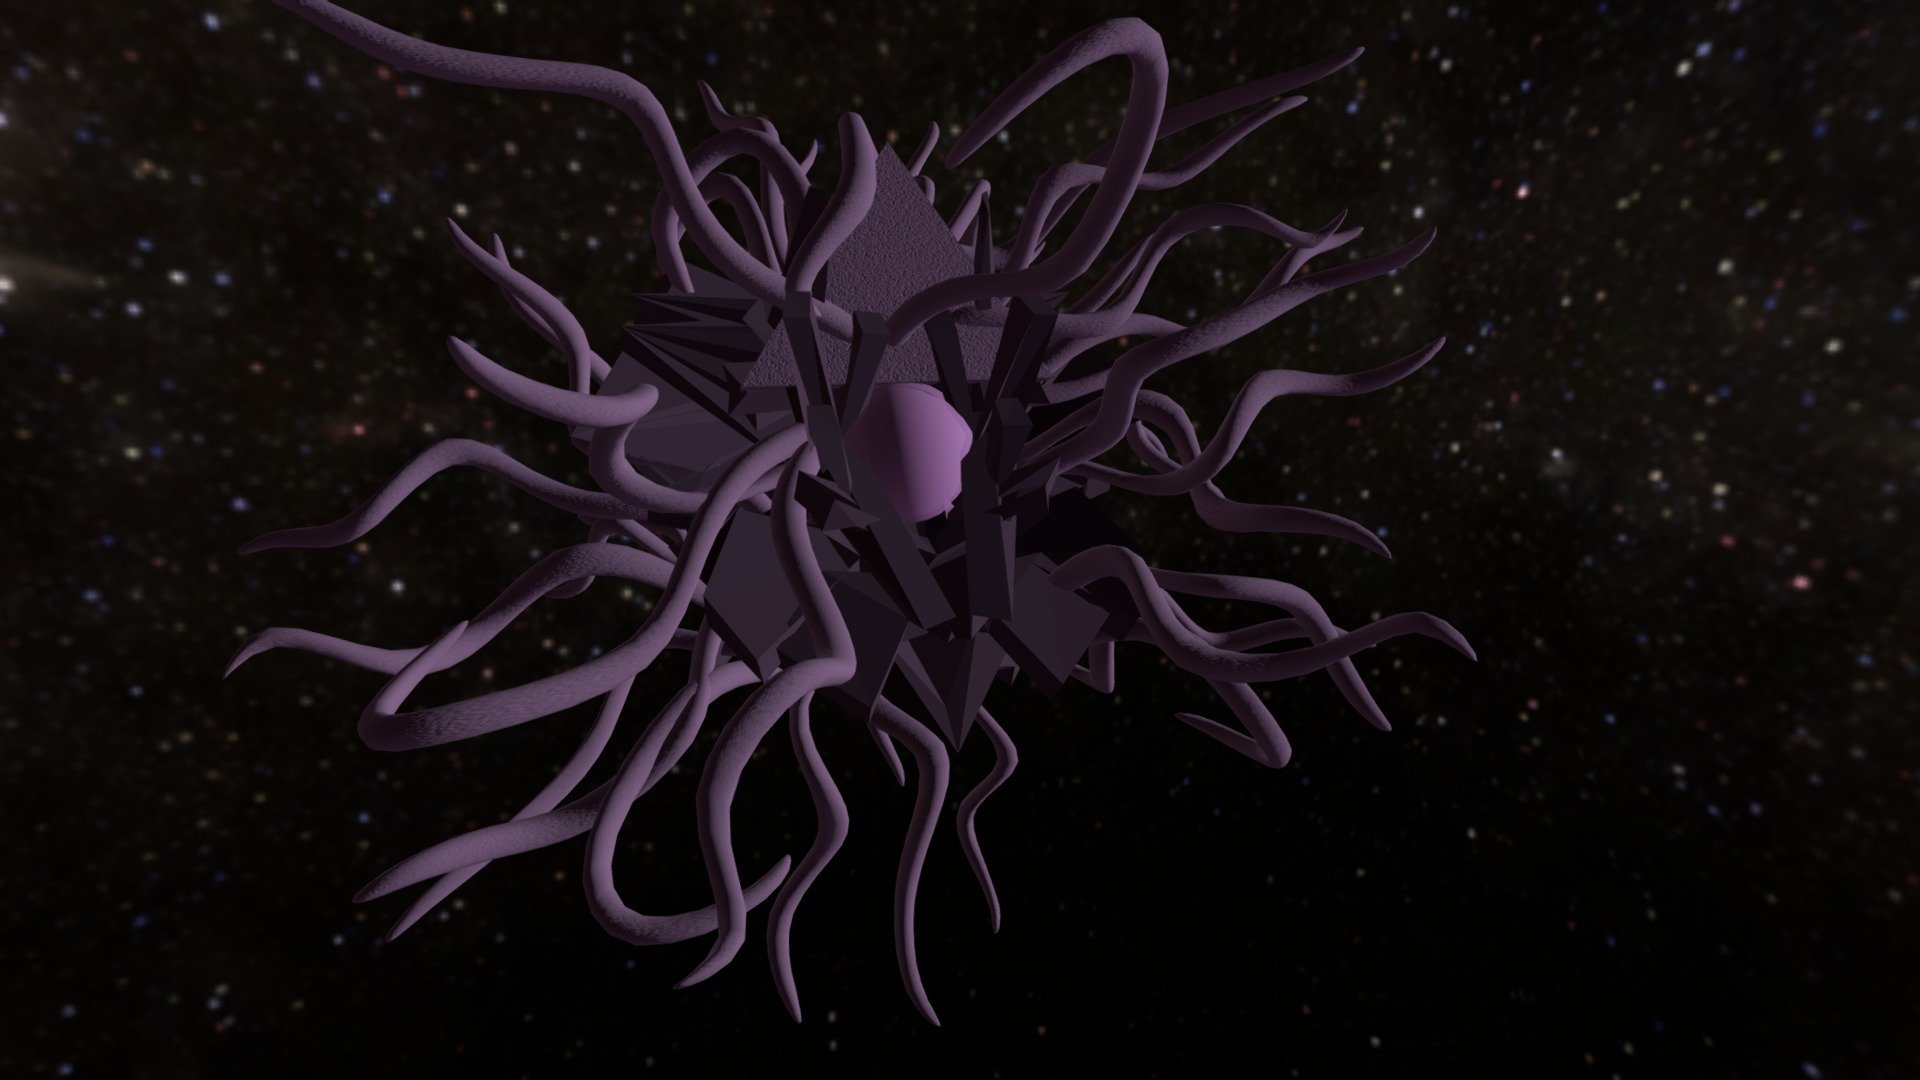 Azathoth-inspired model used for creating a wallpaper as part of an assignment for school. 

It looks weird in Sketchfab, I need to find the right settings so it looks better

Wallpaper: http://imageshack.com/a/img540/456/XGIffJ.png - Azathoth - 3D model by Xenorider (@alloces) 3d model